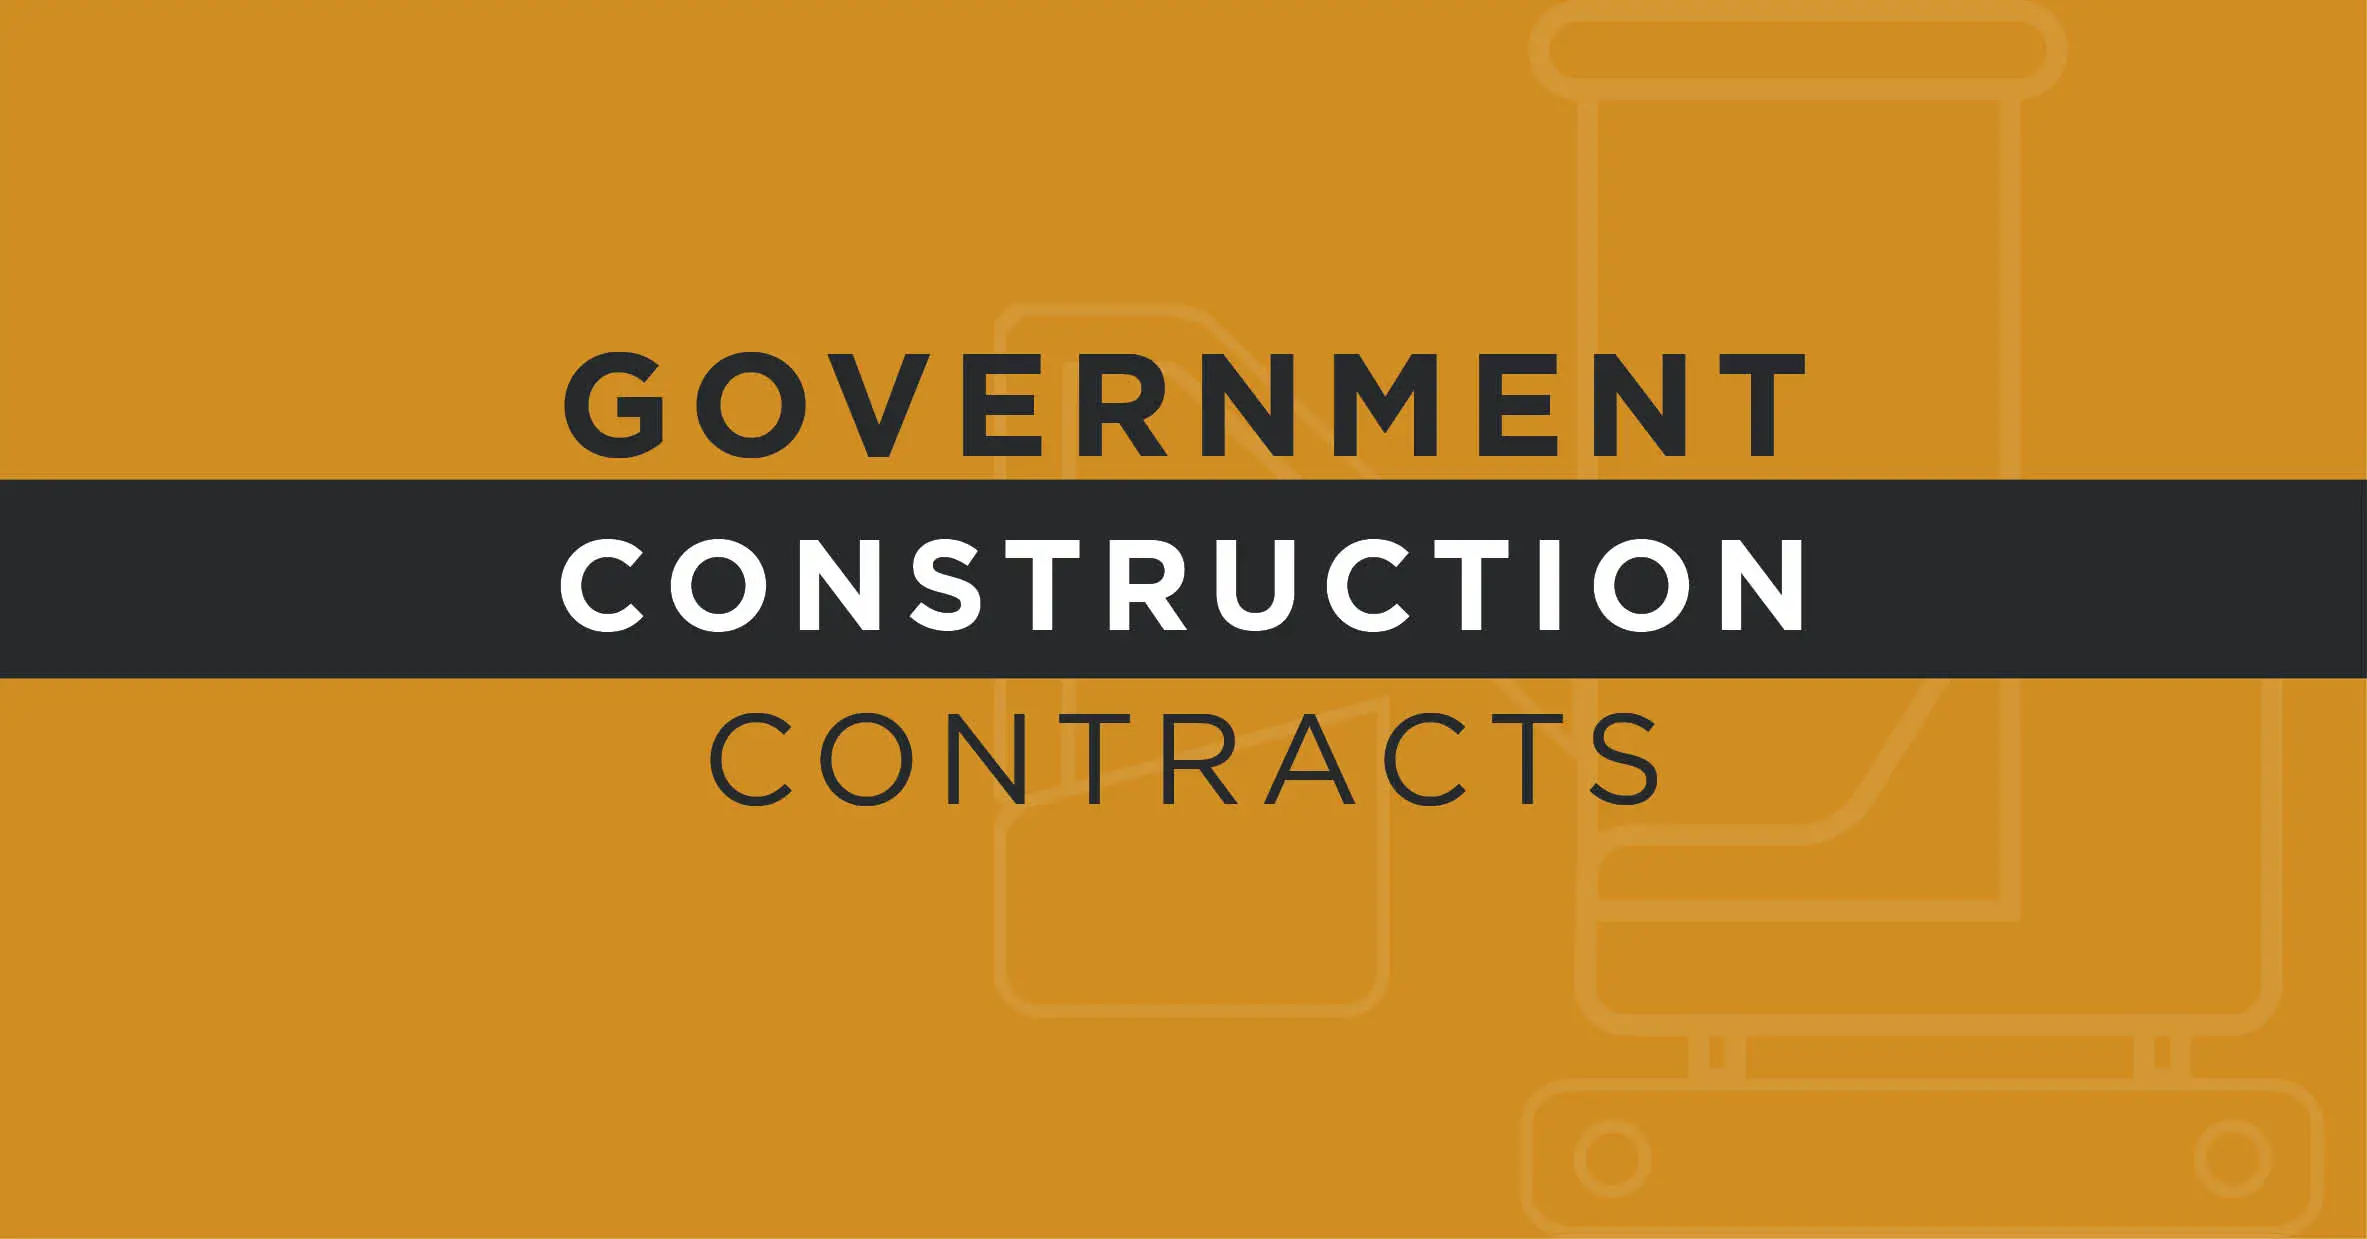 Government Construction Contracts